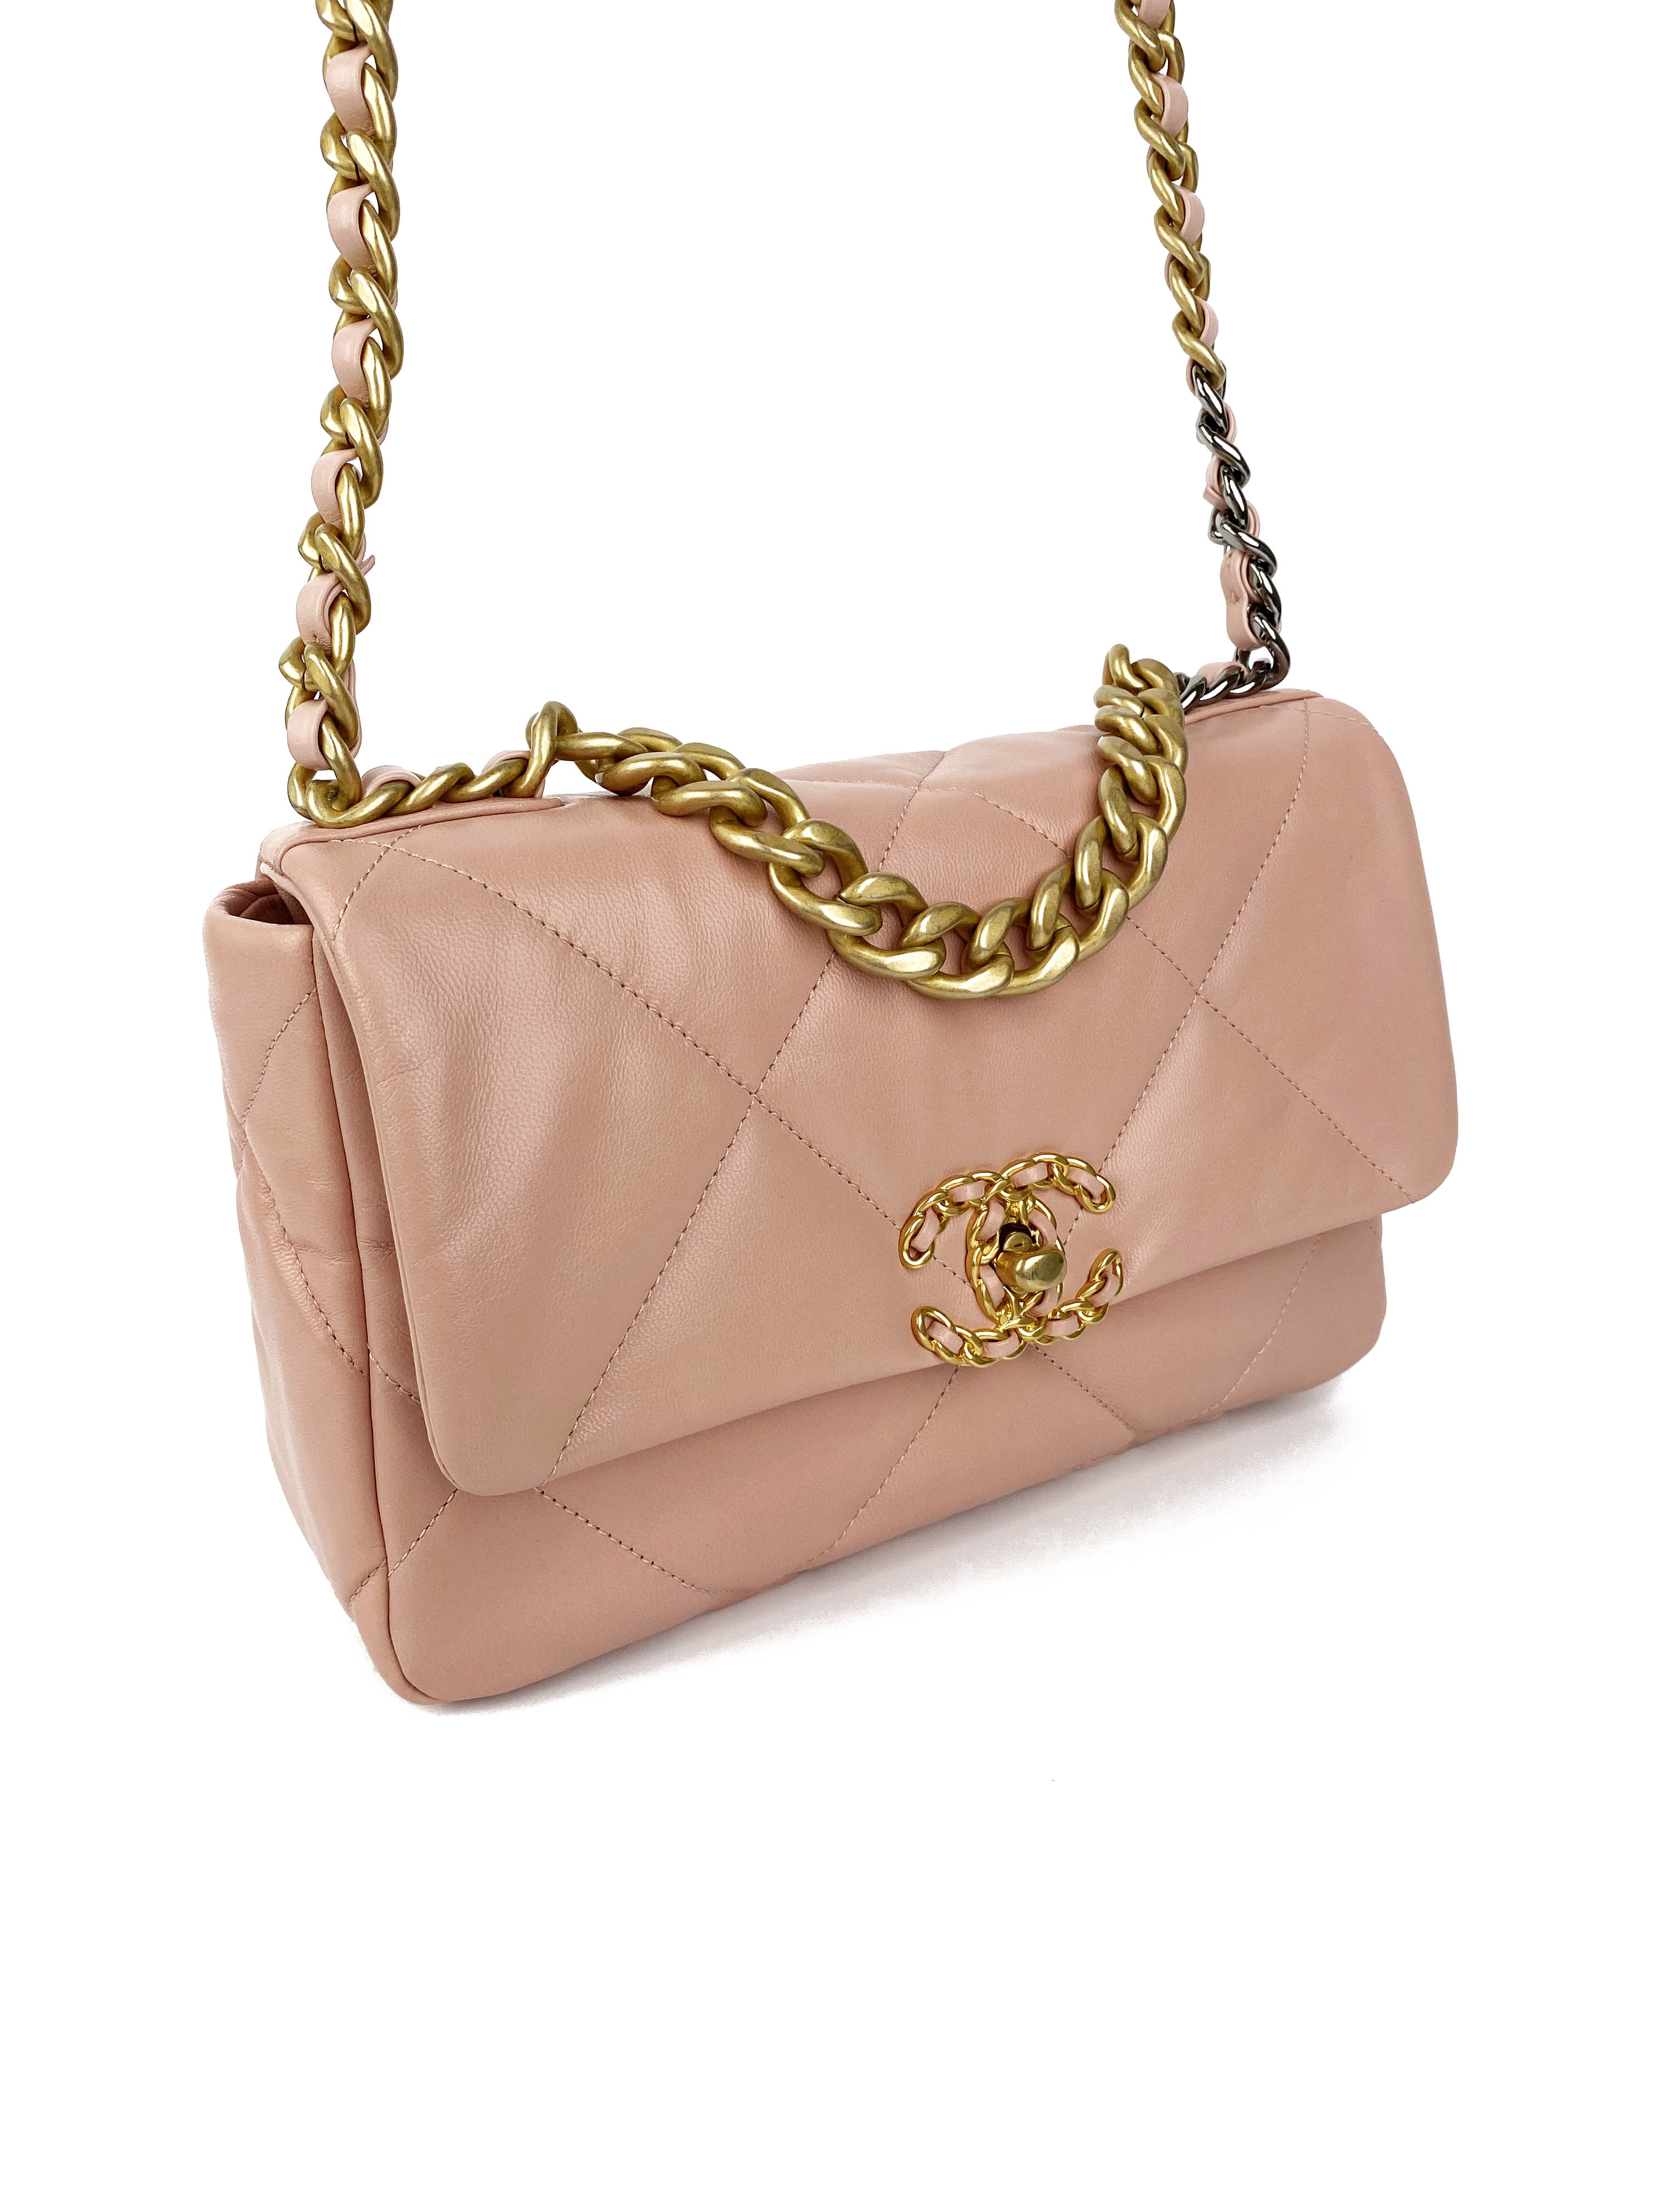 Blush Leather Large Ivy Tote Bag | Lulu Guinness